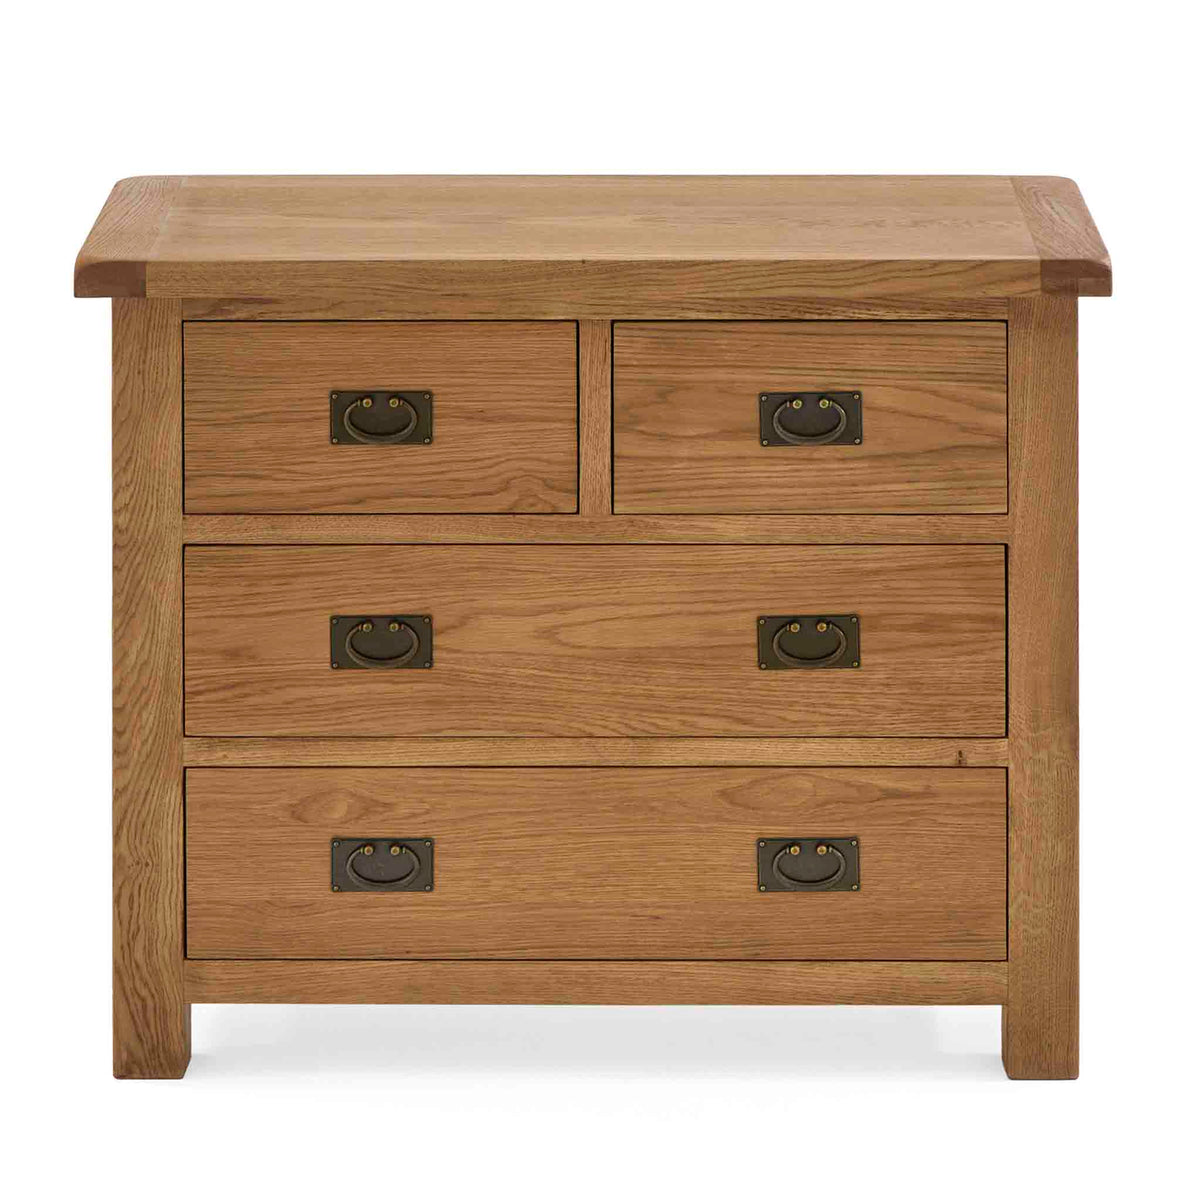 Zelah Oak 2 over 2 Drawer Chest of Drawers - Front view showing top